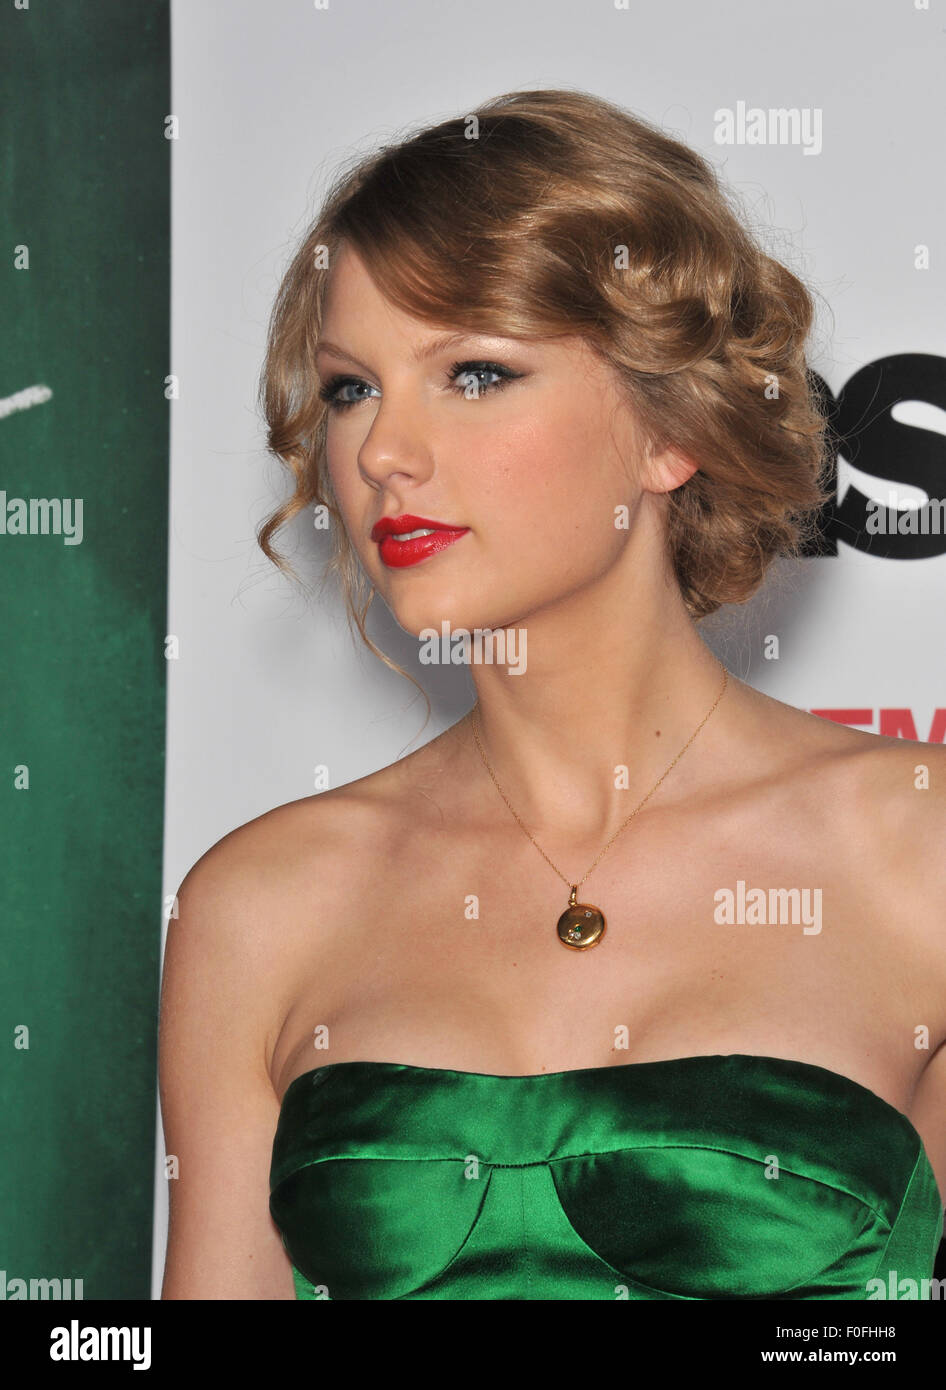 LOS ANGELES, CA - SEPTEMBER 13, 2010: Taylor Swift at the premiere of 'Easy A' at Grauman's Chinese Theatre, Hollywood. Stock Photo